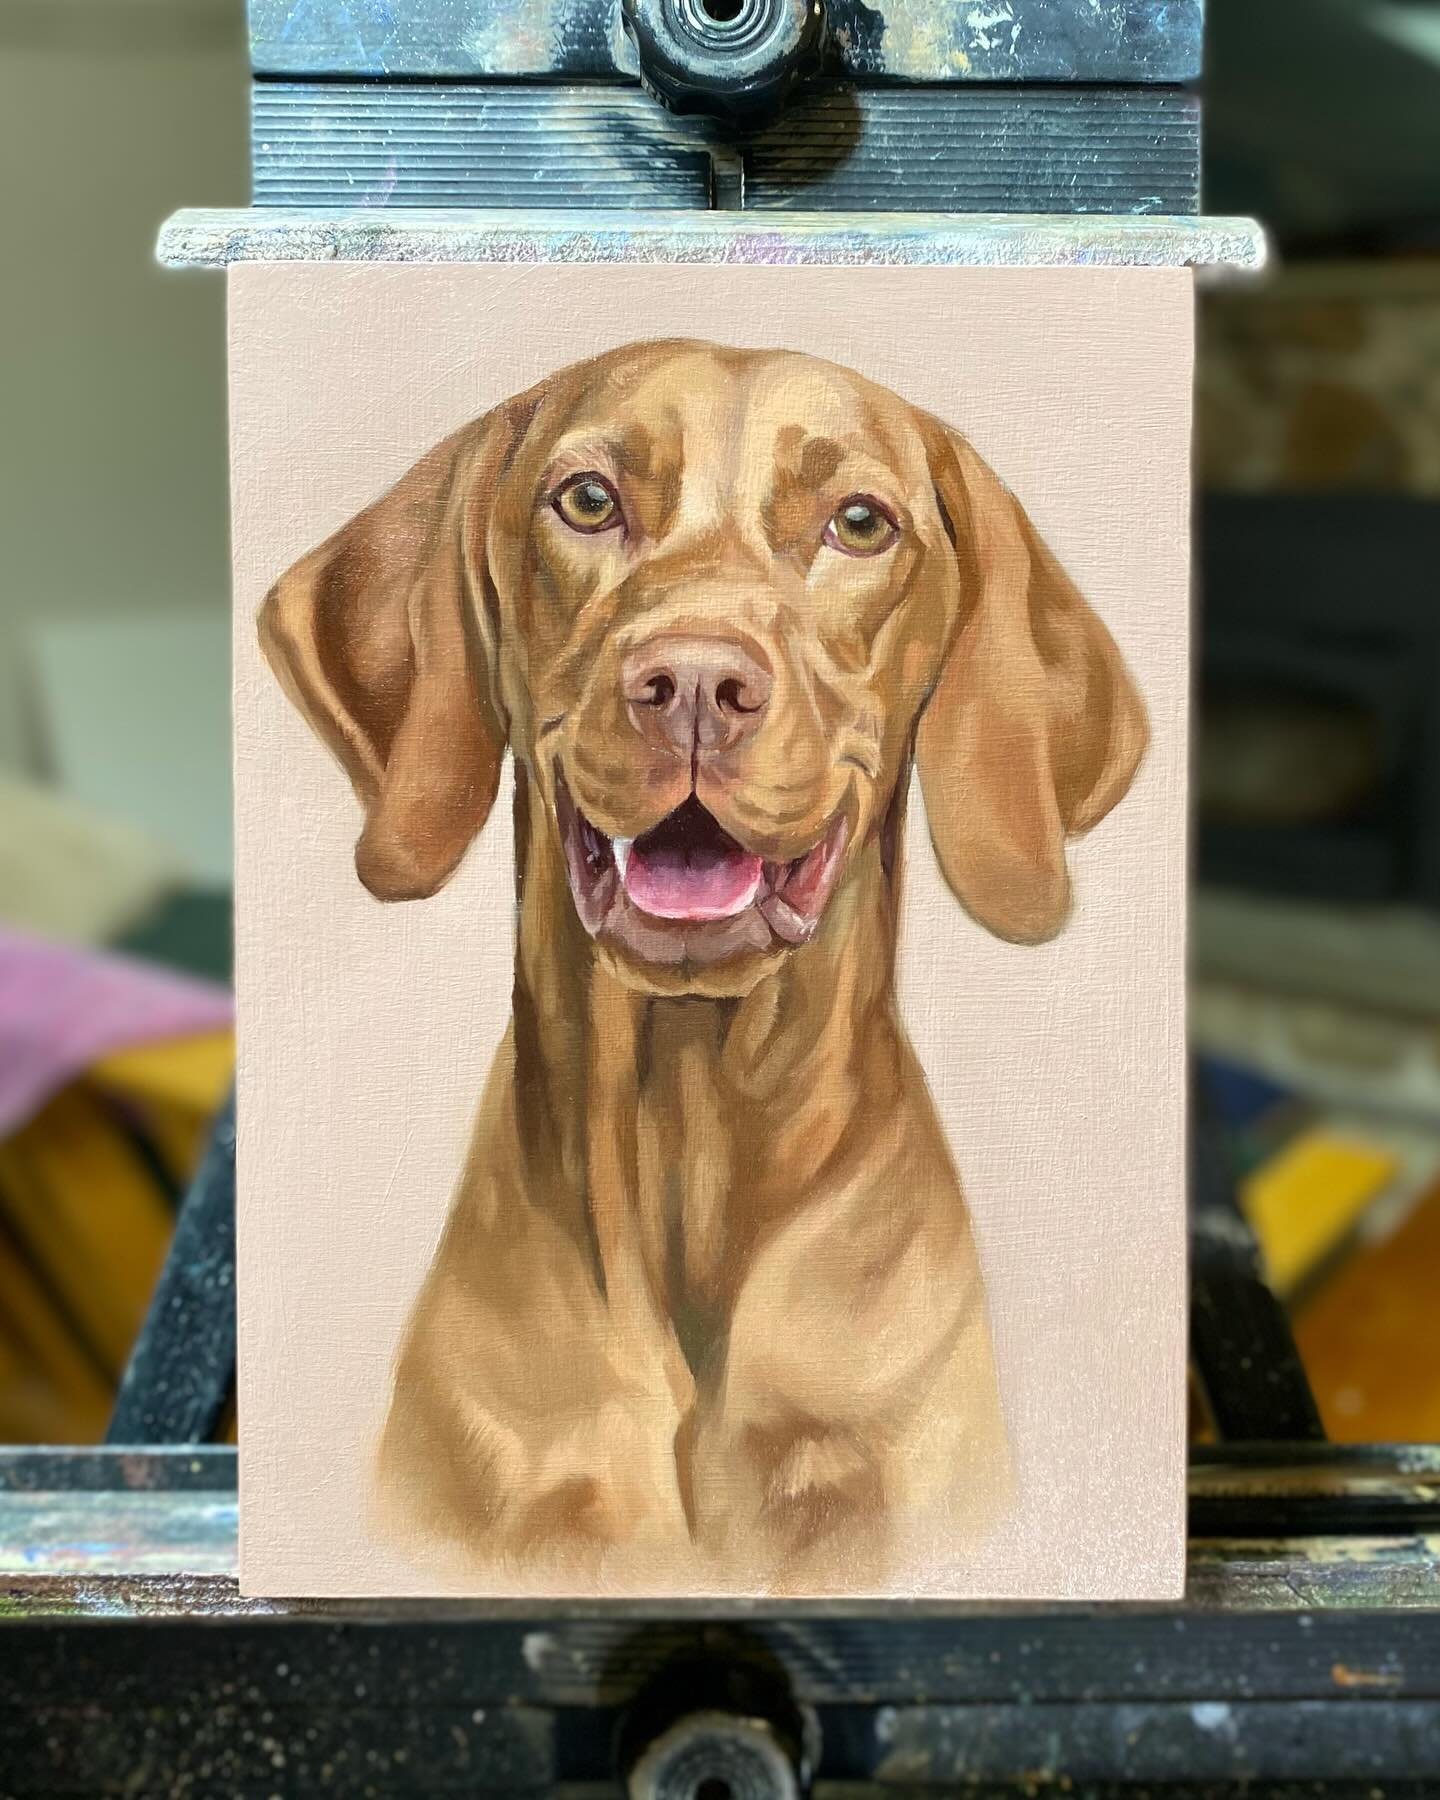 A happy Vizsla in the works. I&rsquo;ll be adding the final details later this week or early next week :) 
Oil paint on wooden panel, 7&rdquo;x5&rdquo;
-
-
-
#vizslas #vizslalovers #oilonpanel #dogartist #dogpainting #dogportraitartist